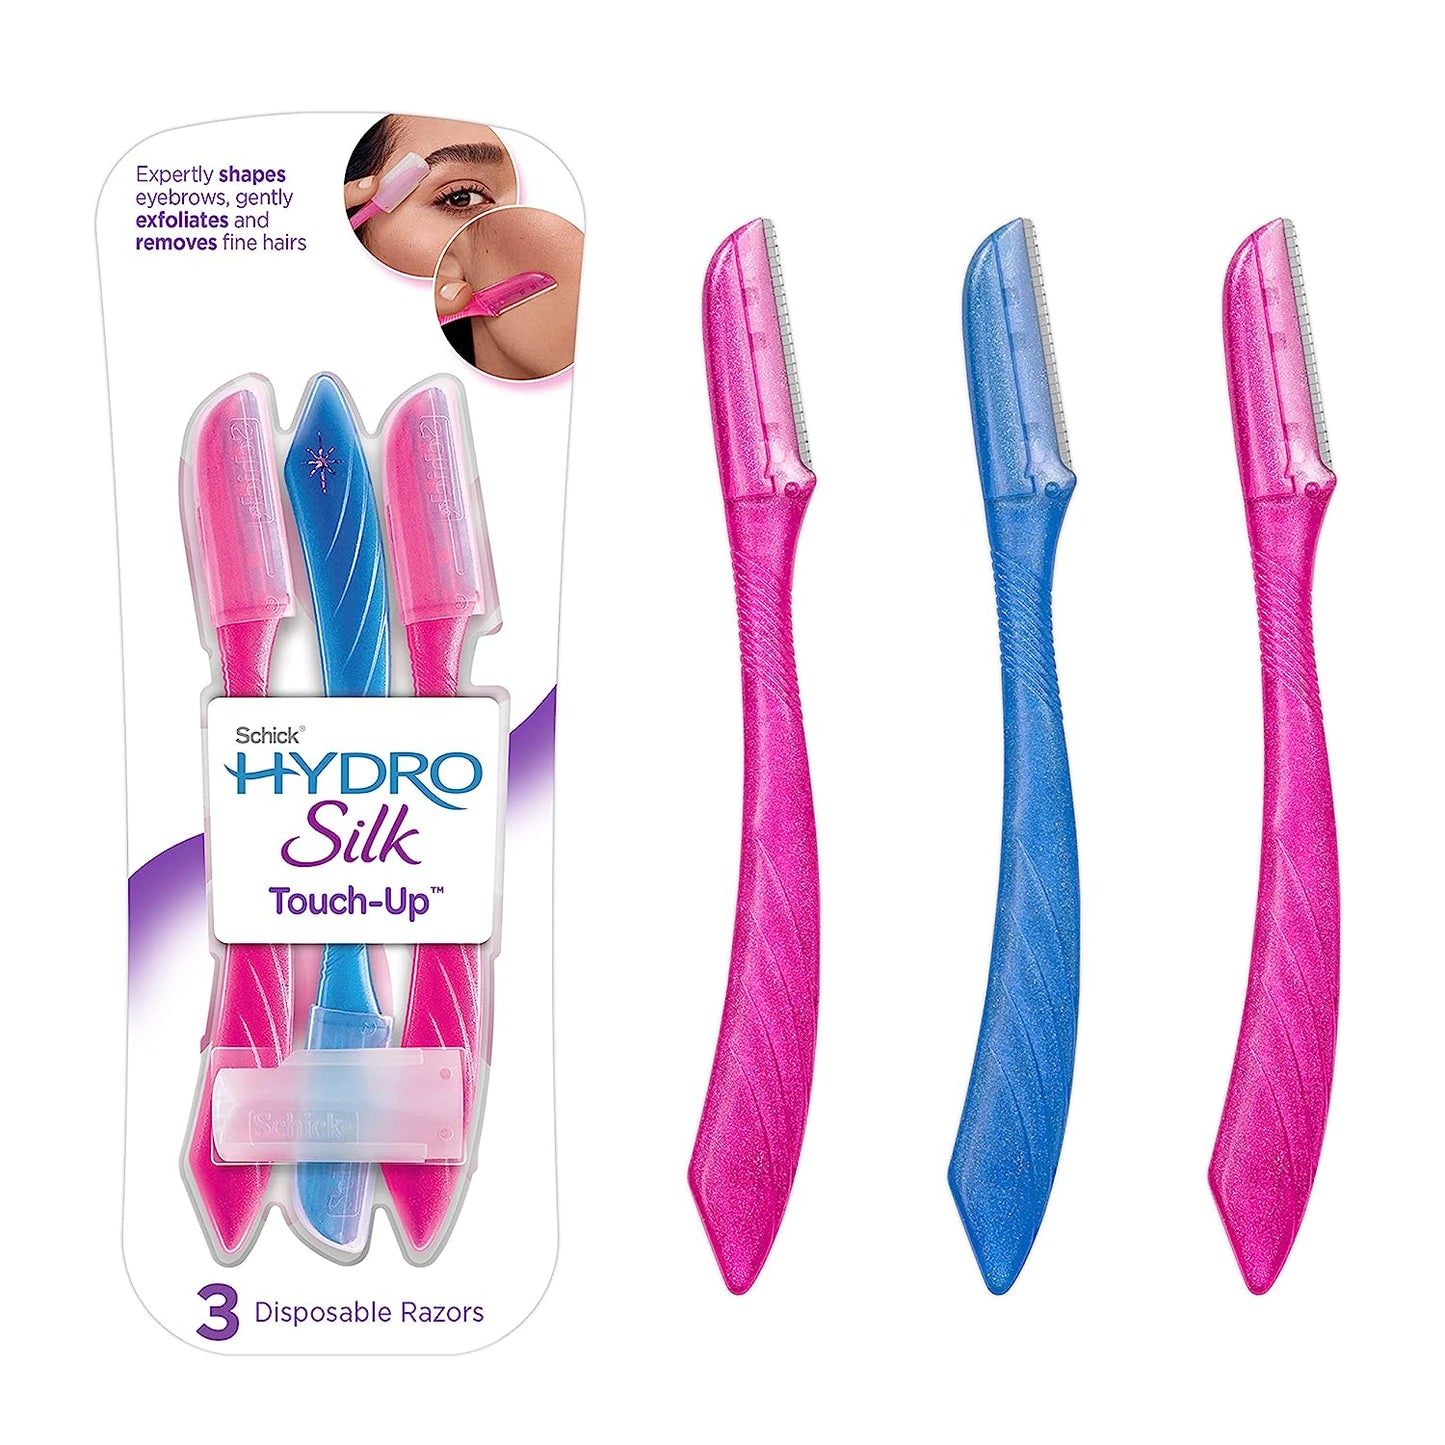 Uniites™, Schick Hydro Silk Touch-Up Exfoliating Dermaplaning Tool, Face & Eyebrow Razor with Precision Cover - 3 Count Dermaplaning Razor For Women $5.91